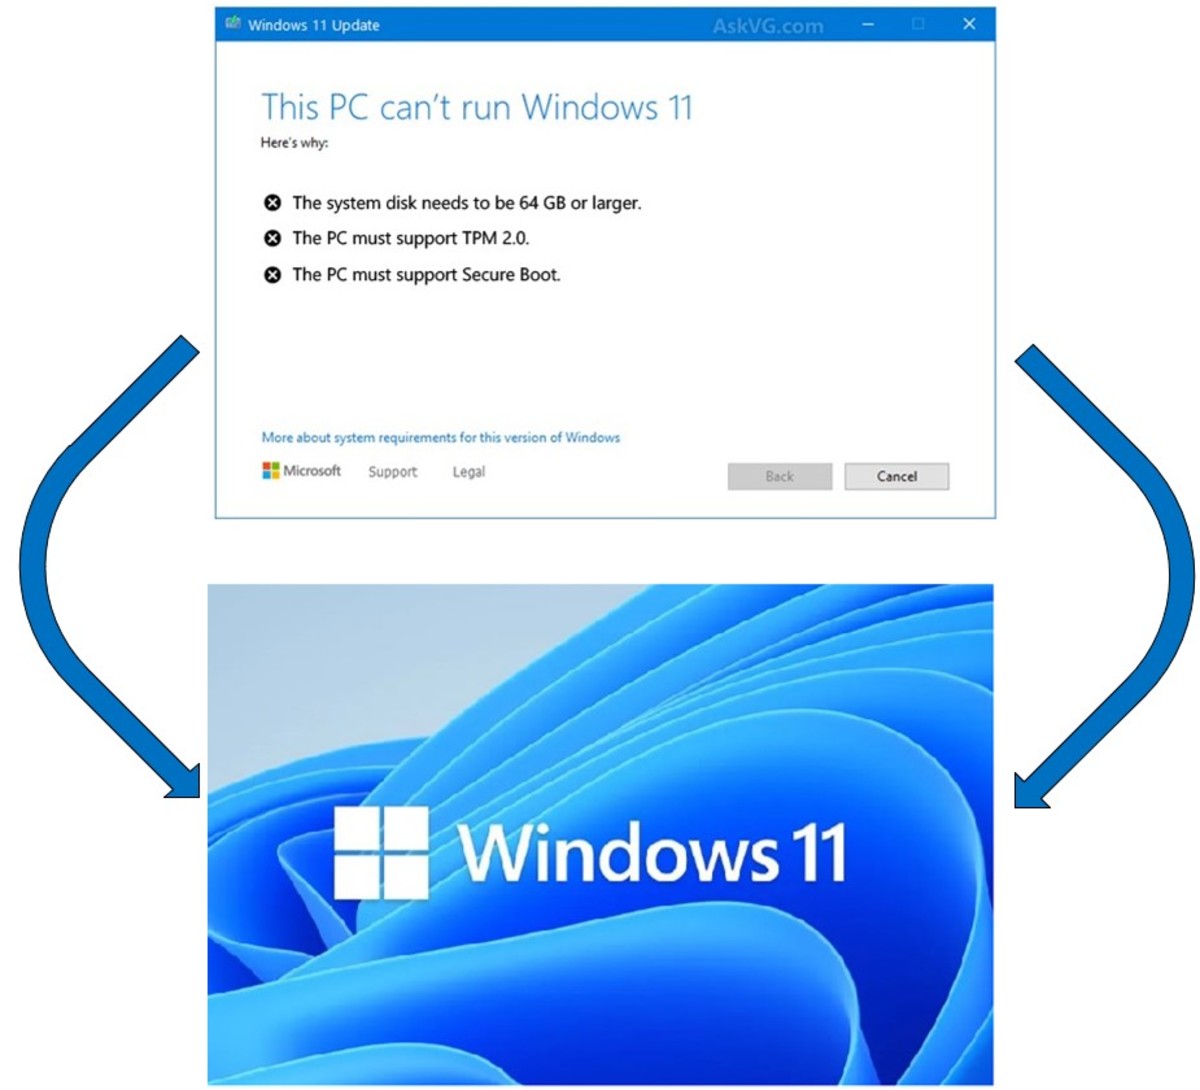 How to Install Windows 11 on an Unsupported Computer